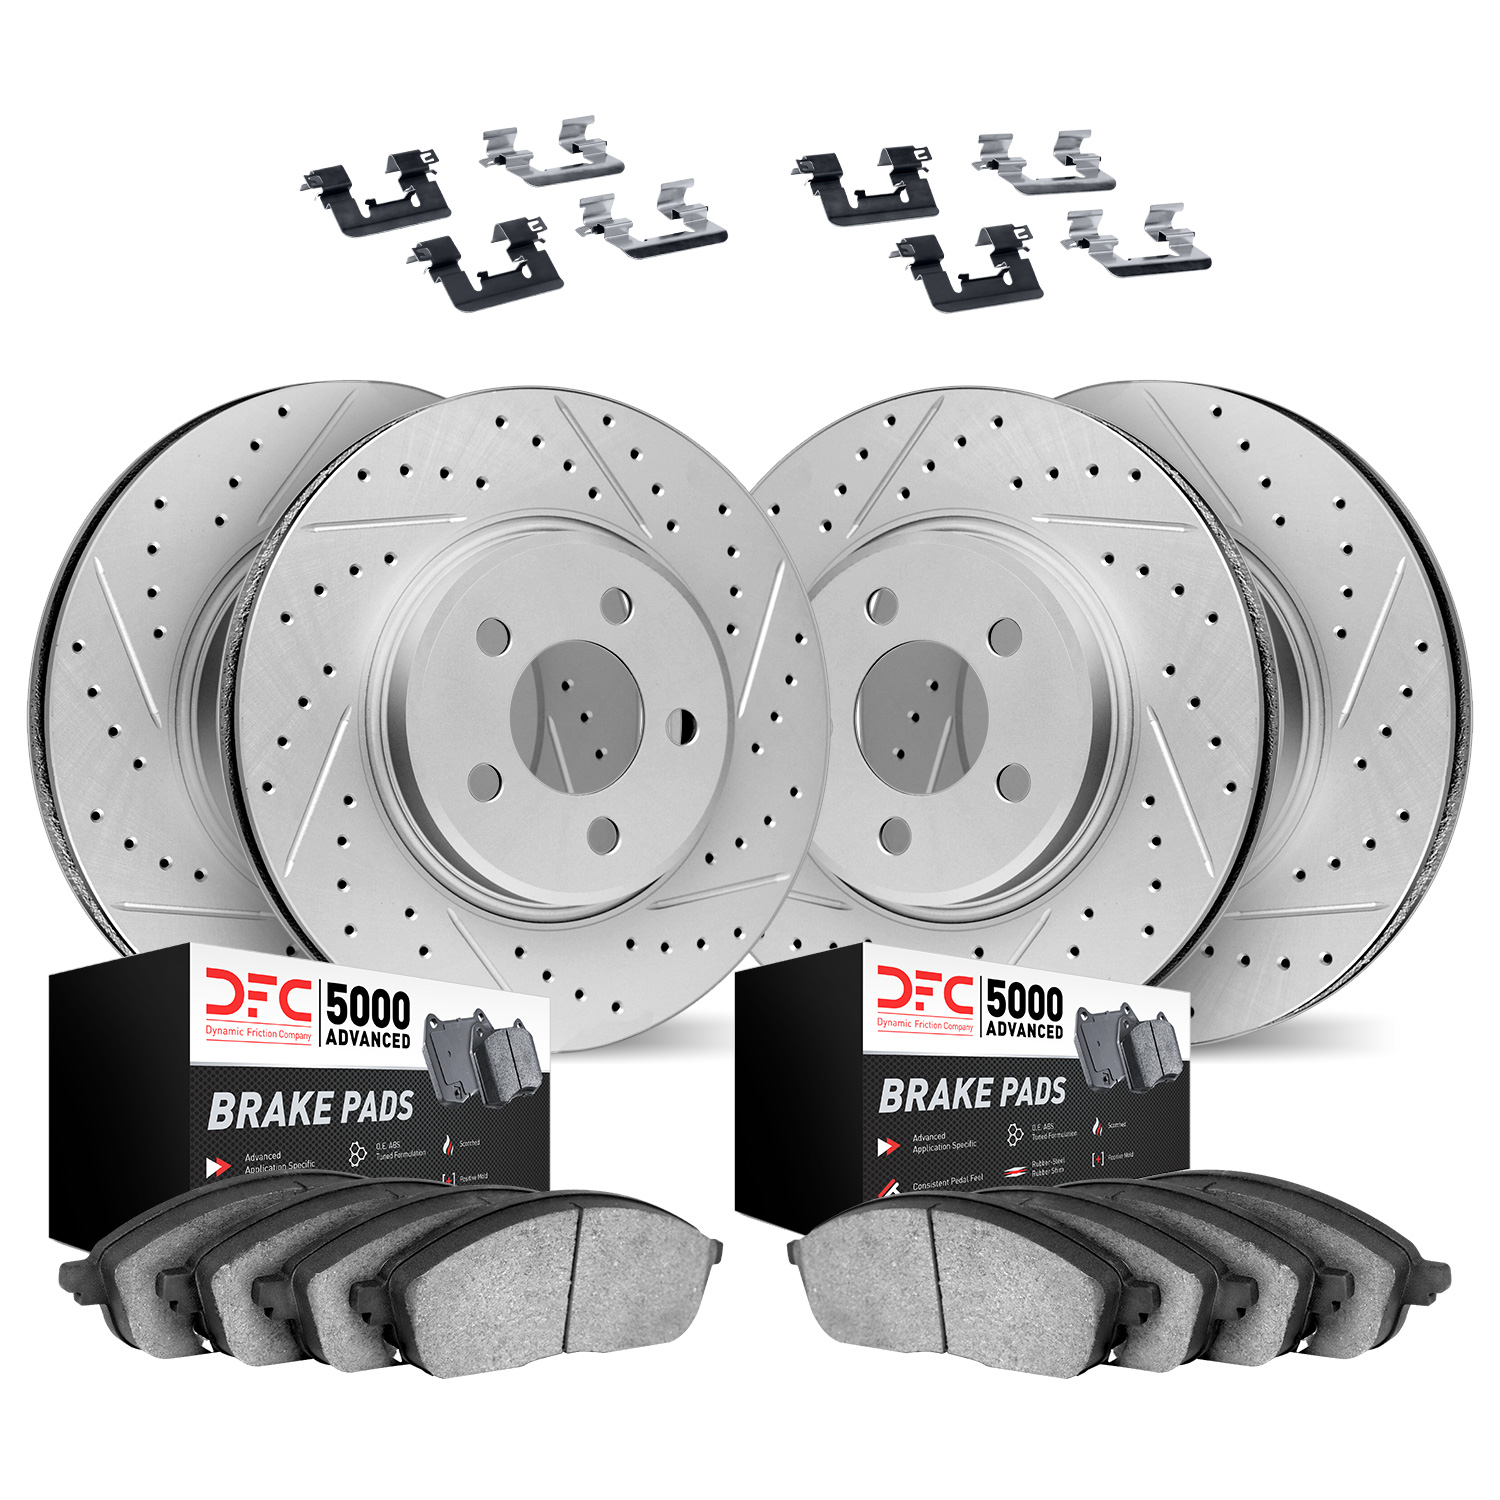 2514-31011 Geoperformance Drilled/Slotted Rotors w/5000 Advanced Brake Pads Kit & Hardware, 2004-2010 BMW, Position: Front and R